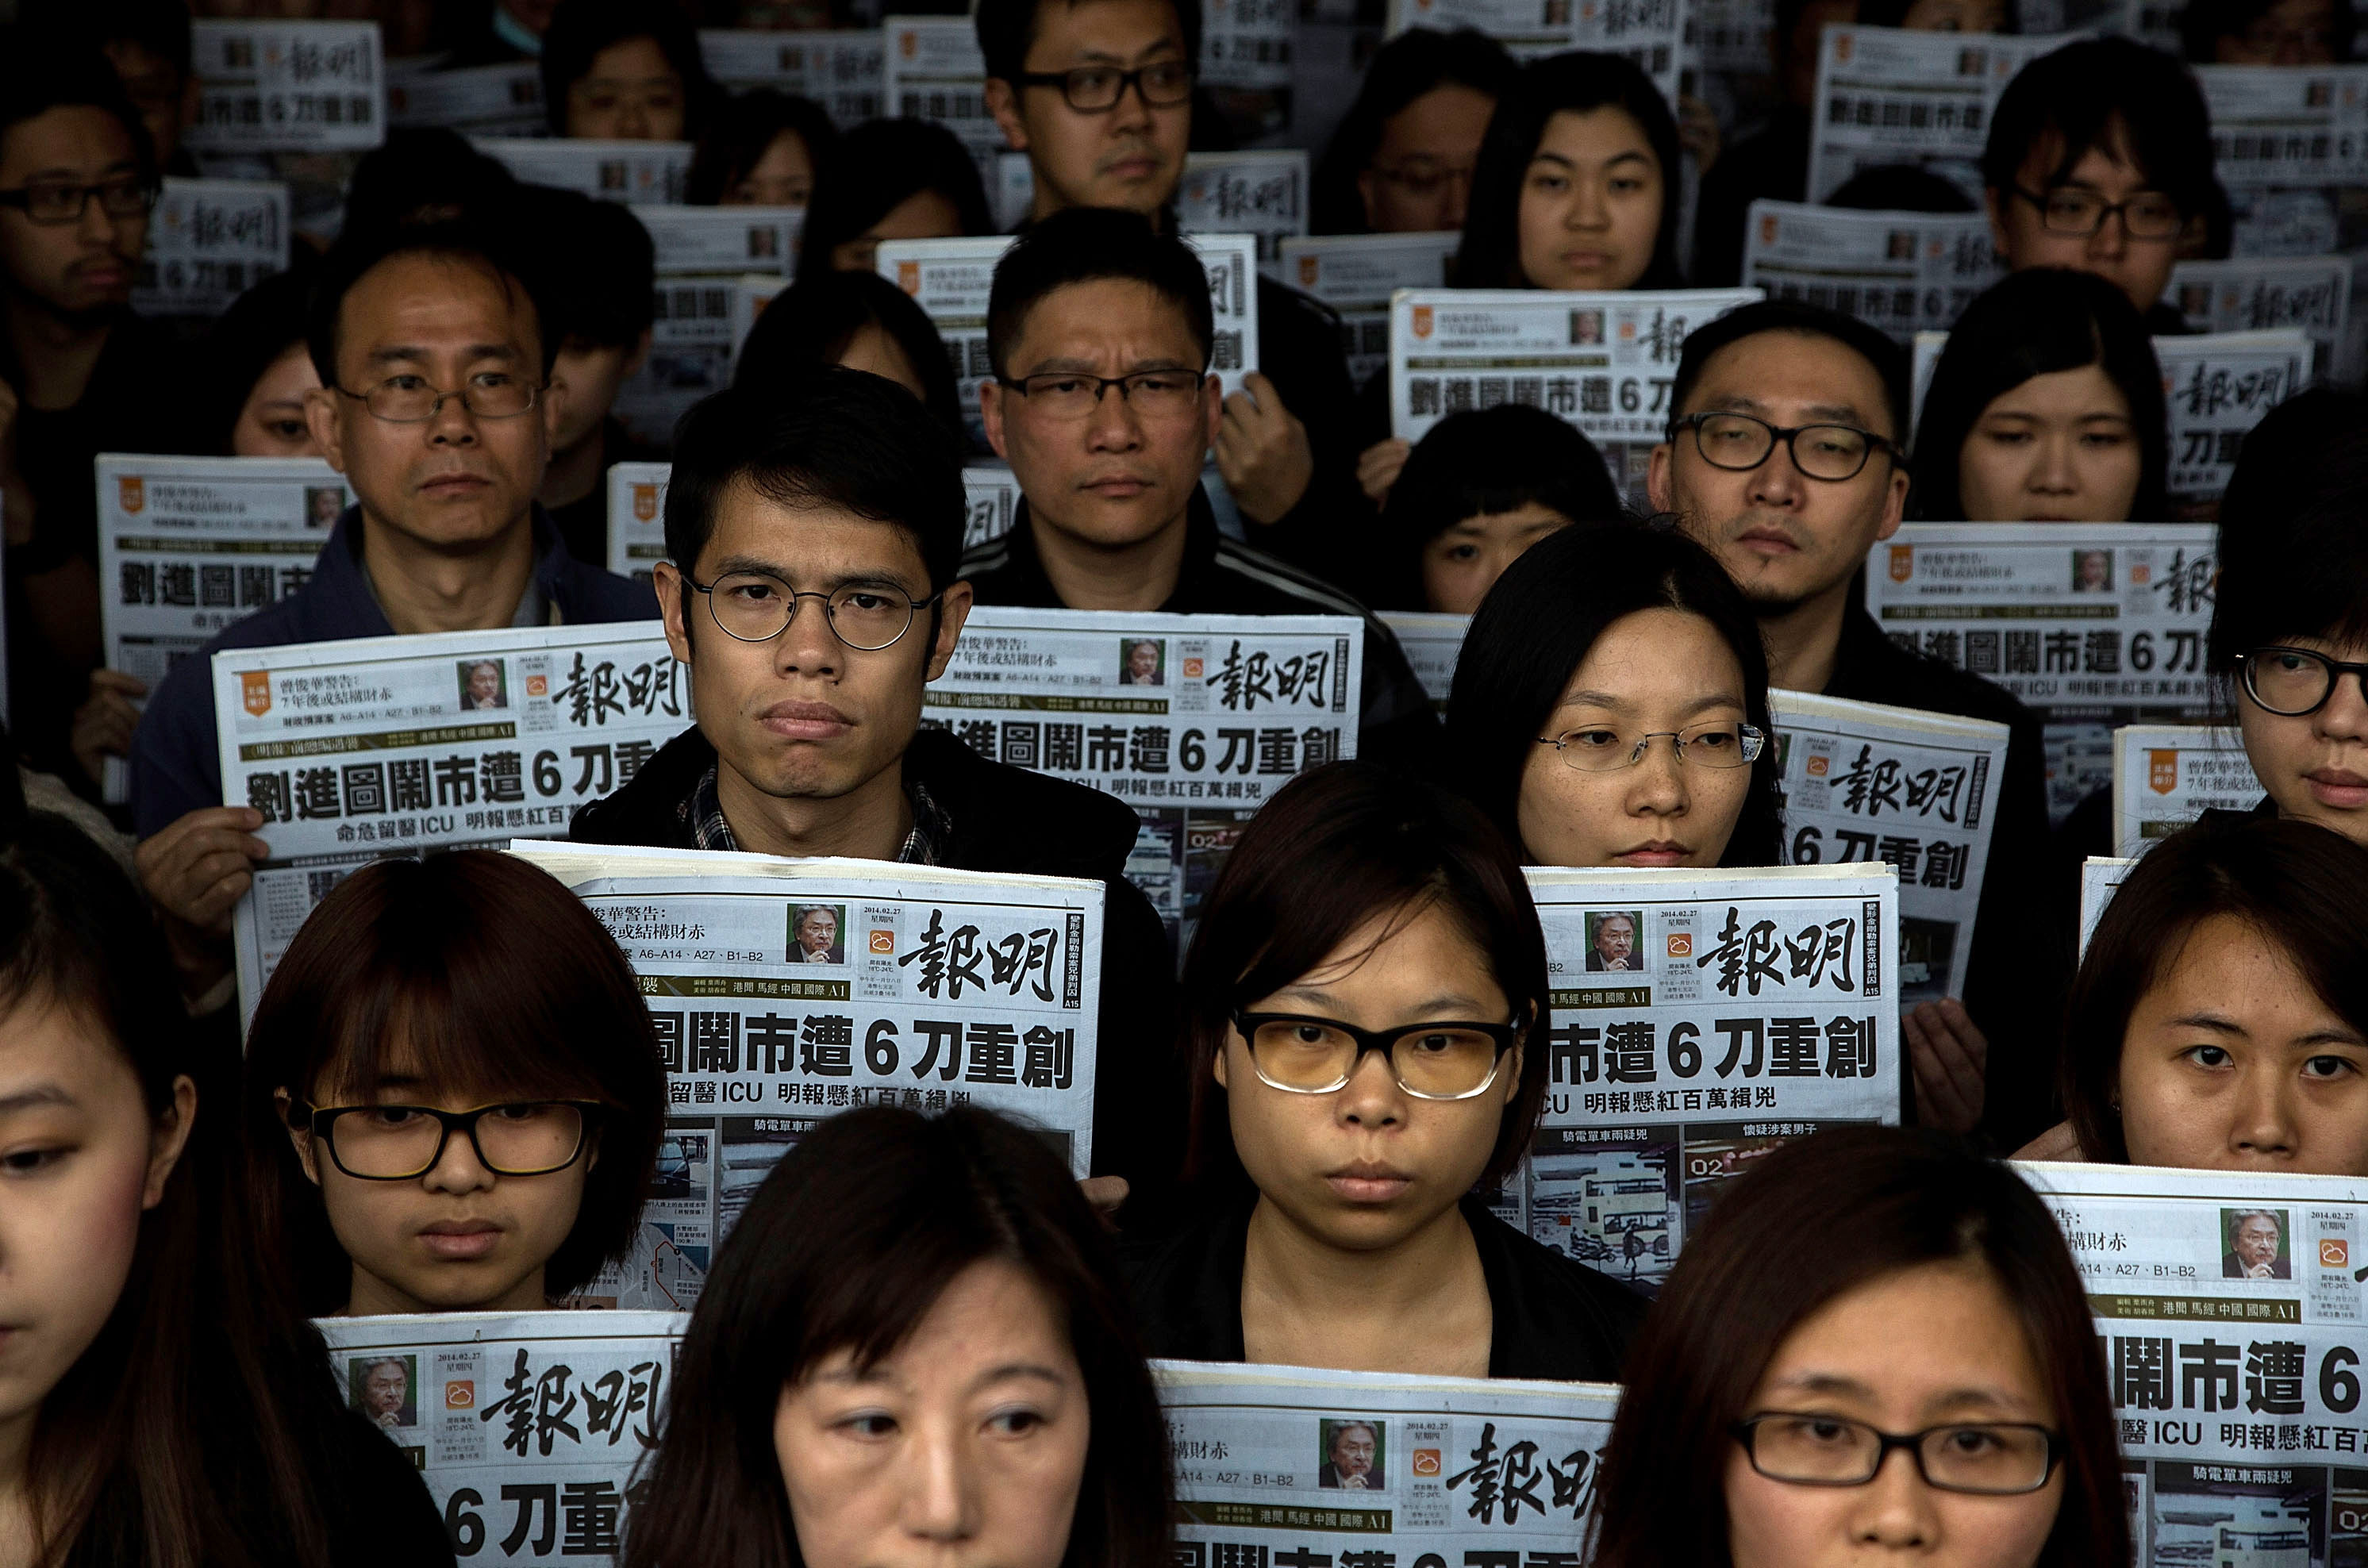 HONG KONG - FEBRUARY 27:Staff members of Ming Pao hold its newspaper printed on February 27, 2014 in which former chief editor of Ming Pao kevin Lau Chun-to was stabbed as front page story du